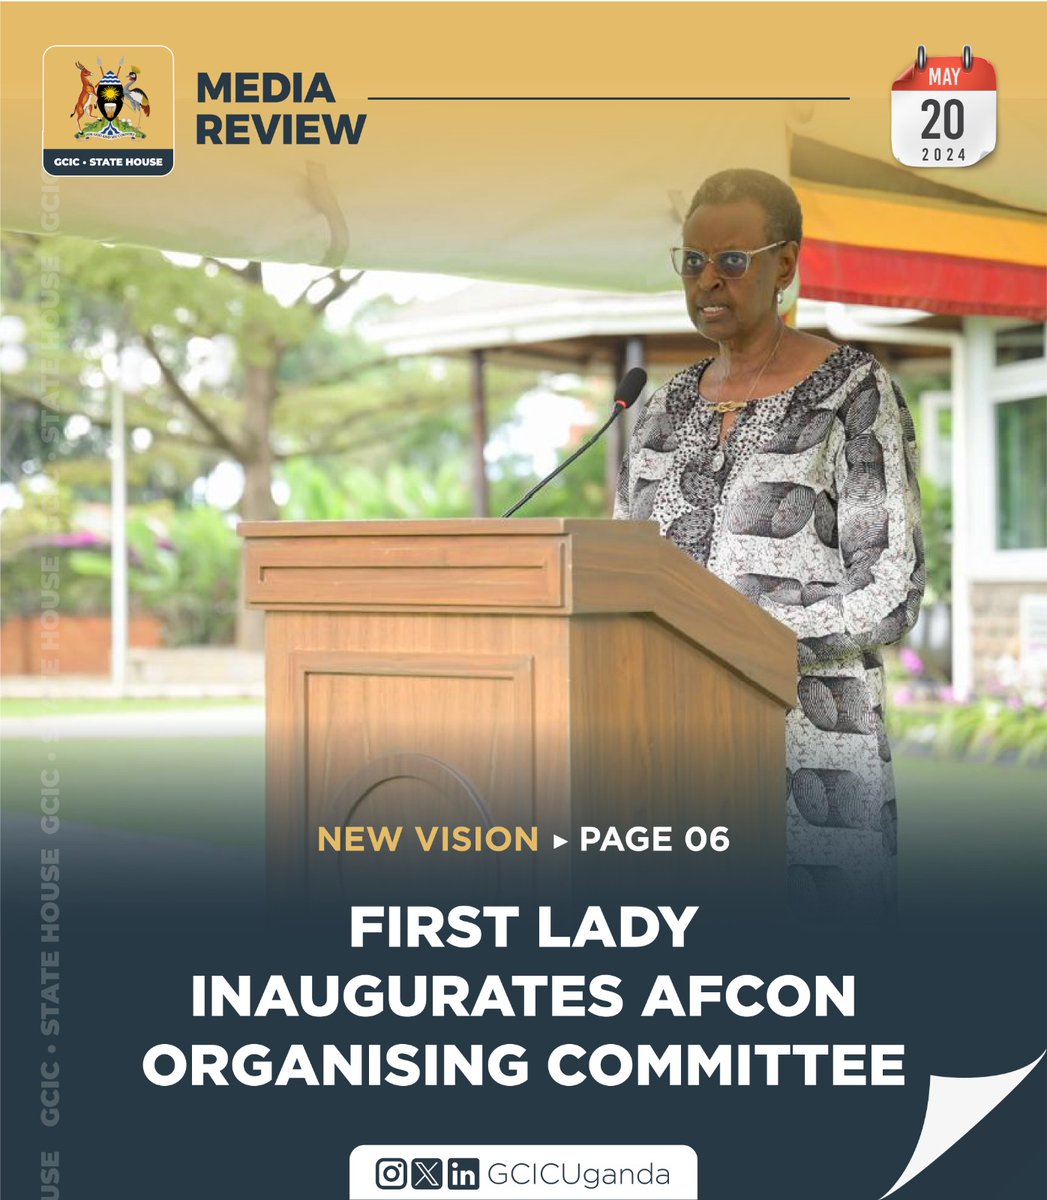 The First Lady and Minister of Education and Sports Hon. Janet Museveni, has inaugurated a Local Organising Committee (LOC) and seven sub-committees to effectively plan and execute a successful Africa Cup of Nations (AFCON) 2027 tournament in Uganda. media.gcic.go.ug/gcic-media-rev…